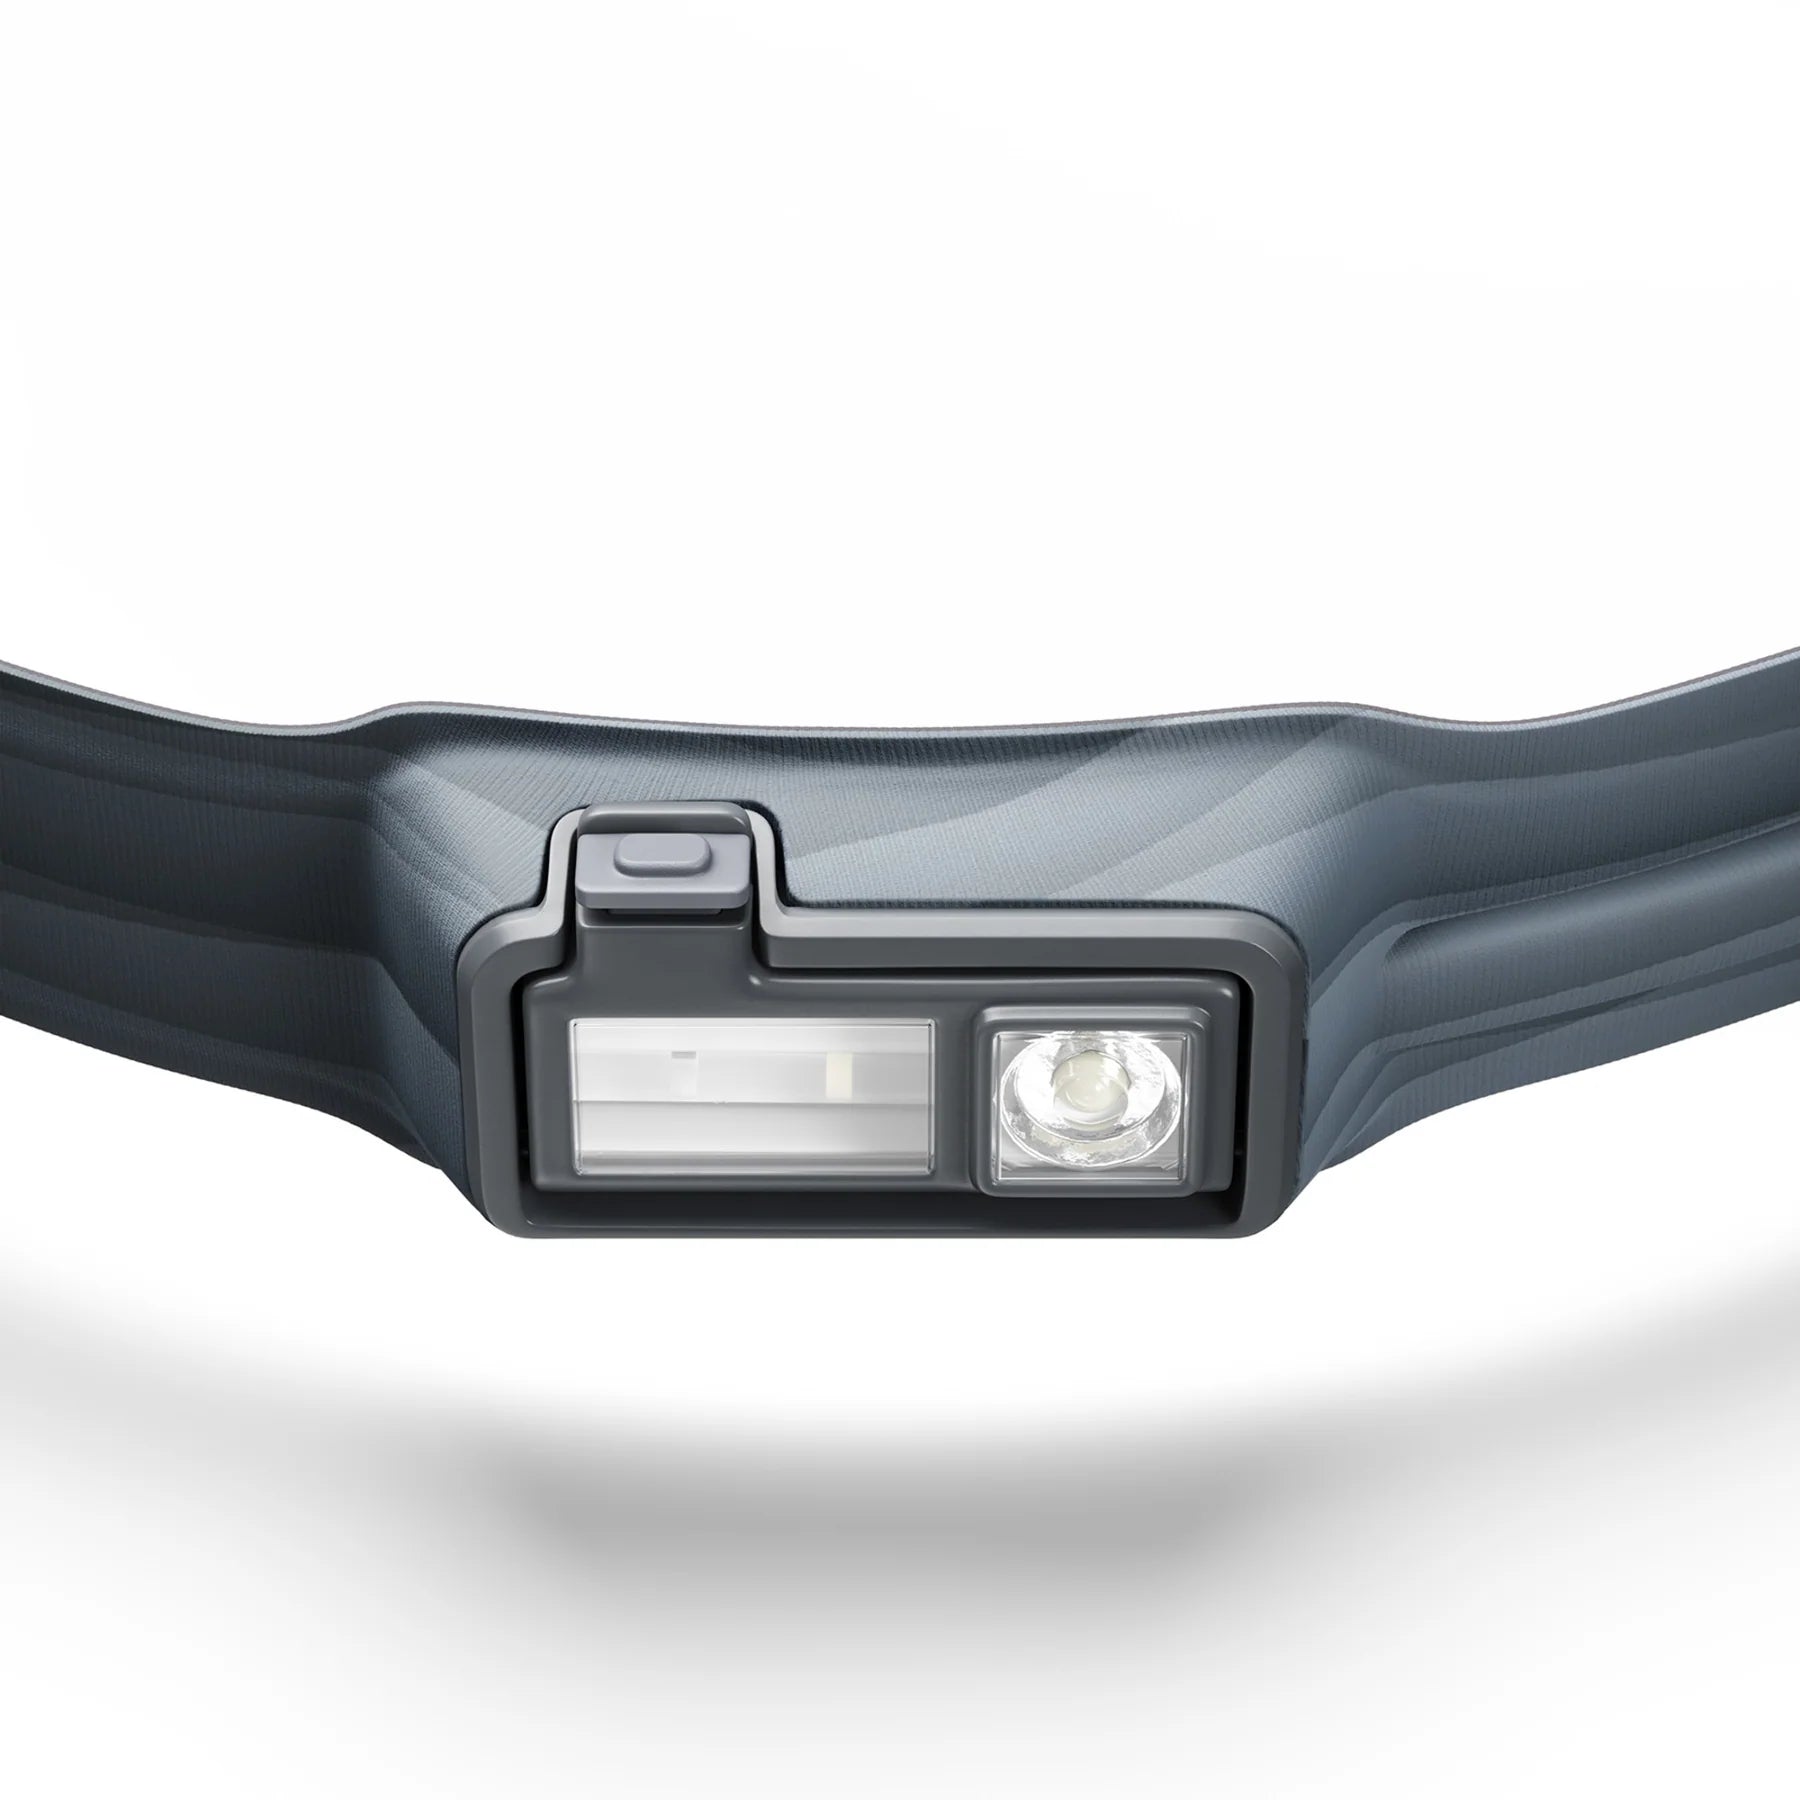 No-Bounce, Ultra-Thin, Rechargeable Head LightHeadLamp 425 combines an ultra-thin 9mm front with balanced weight and moisture-wicking fabrics to create a fit so comfortable, you’ll forget you are wearing it. With five front modes and a rear red light for added visibility, this headlamp is ready to illuminate your next adventure. www.defenceqstore.com.au